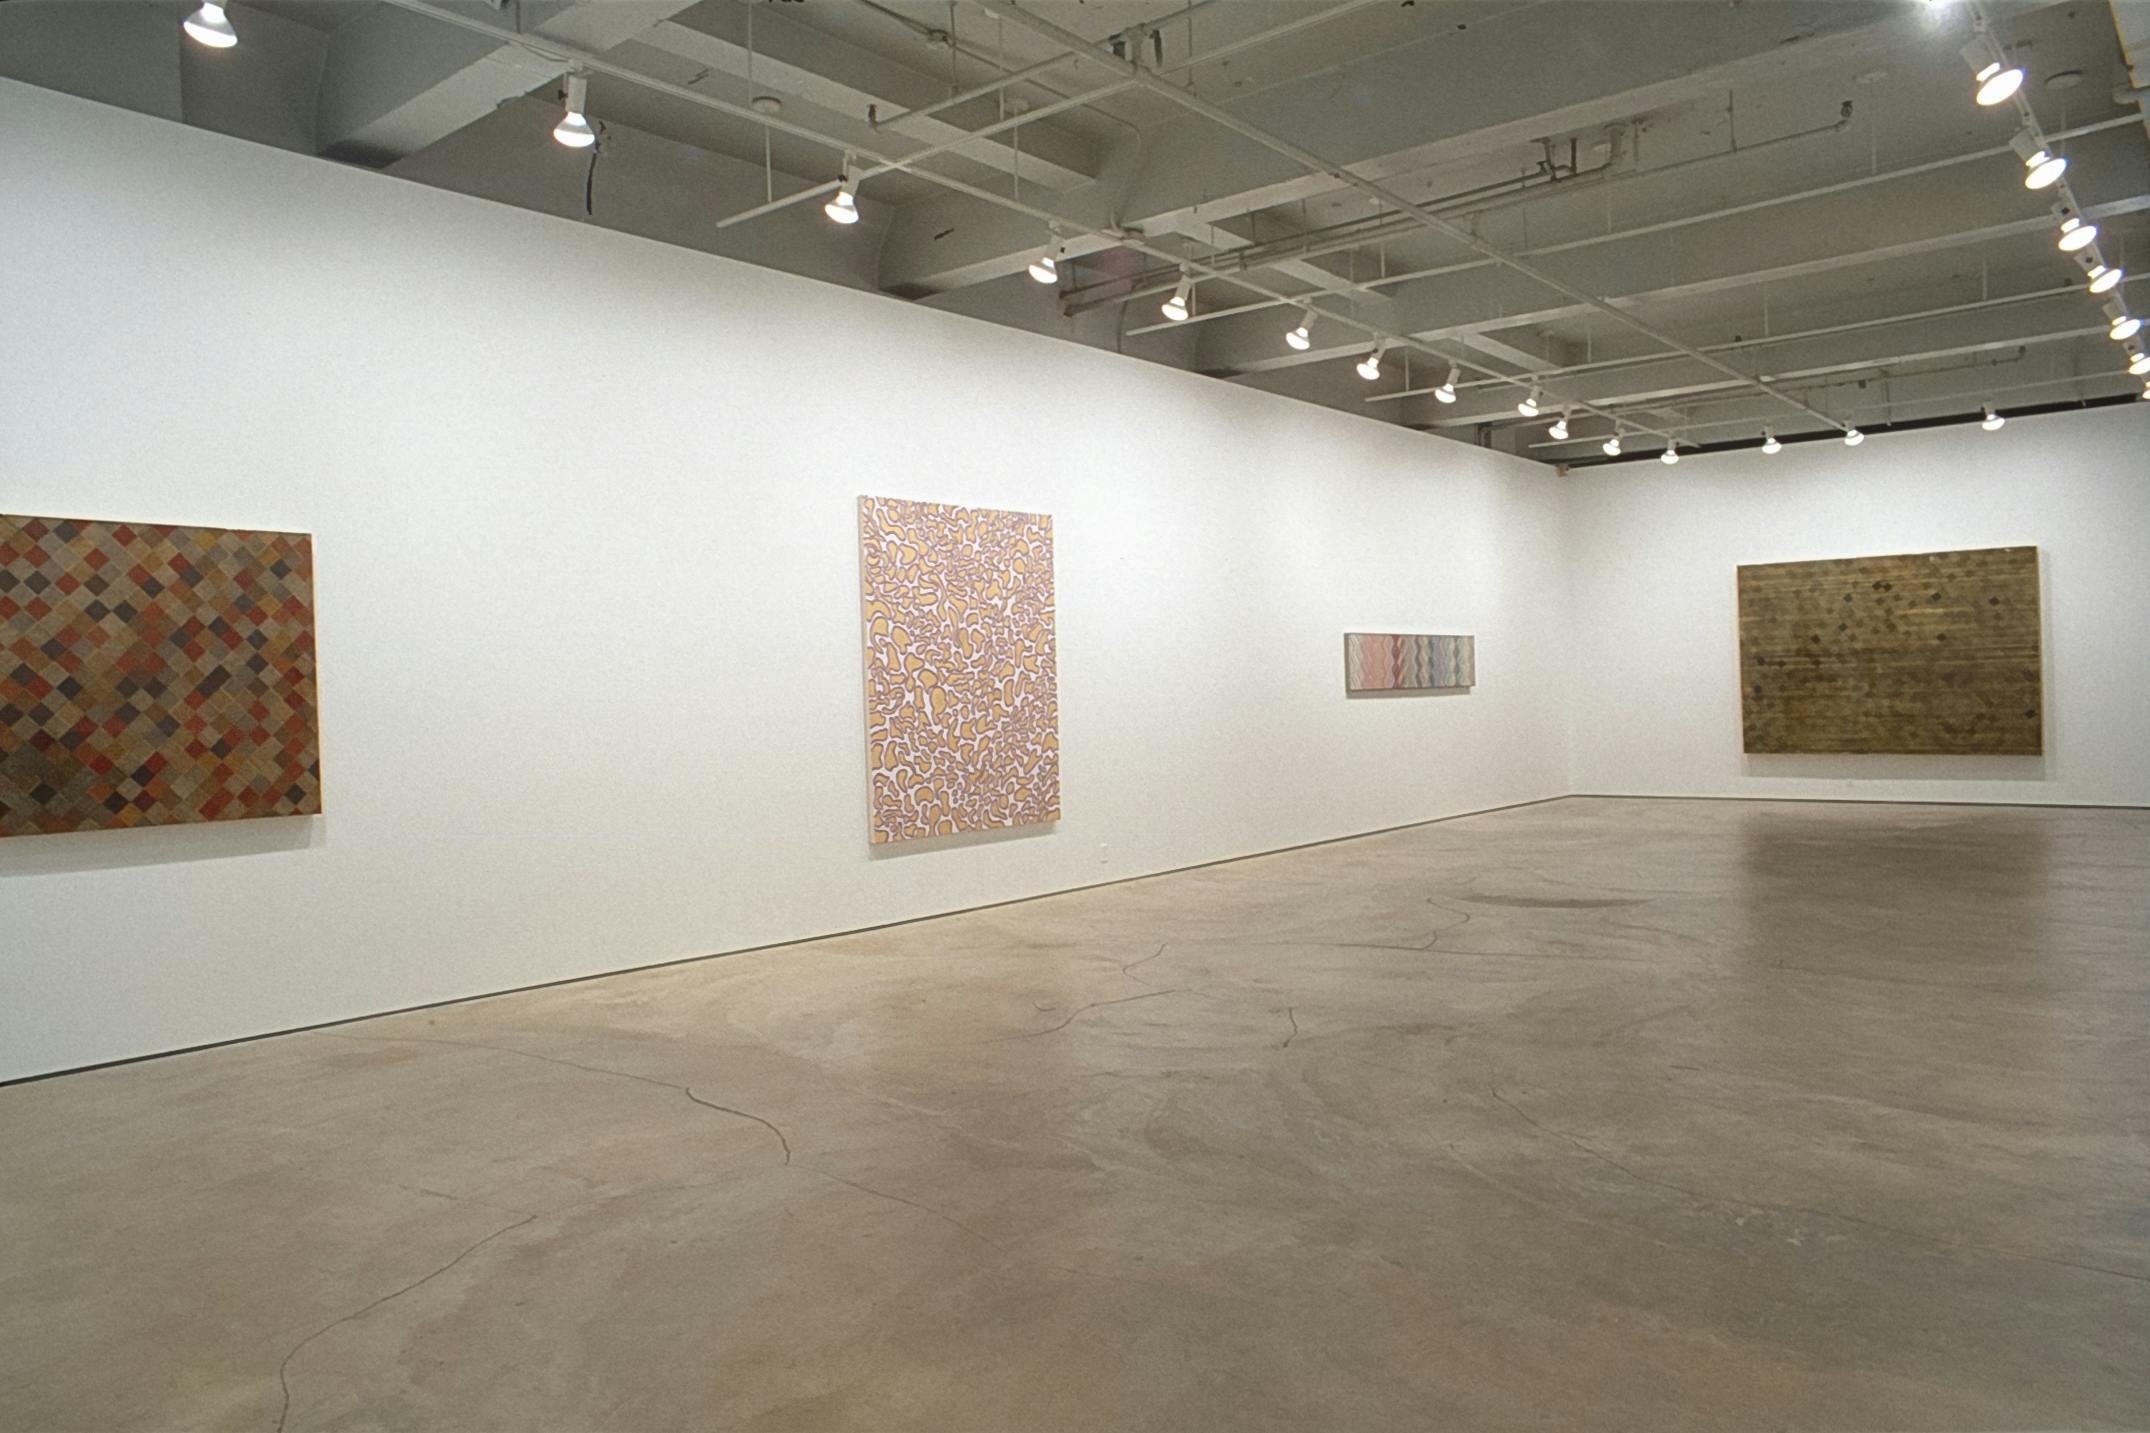 Four abstract paintings of various sizes are installed on the gallery walls. Two of them are painted in a brown colour scheme. Two paintings in the middle share a similar pink  color.